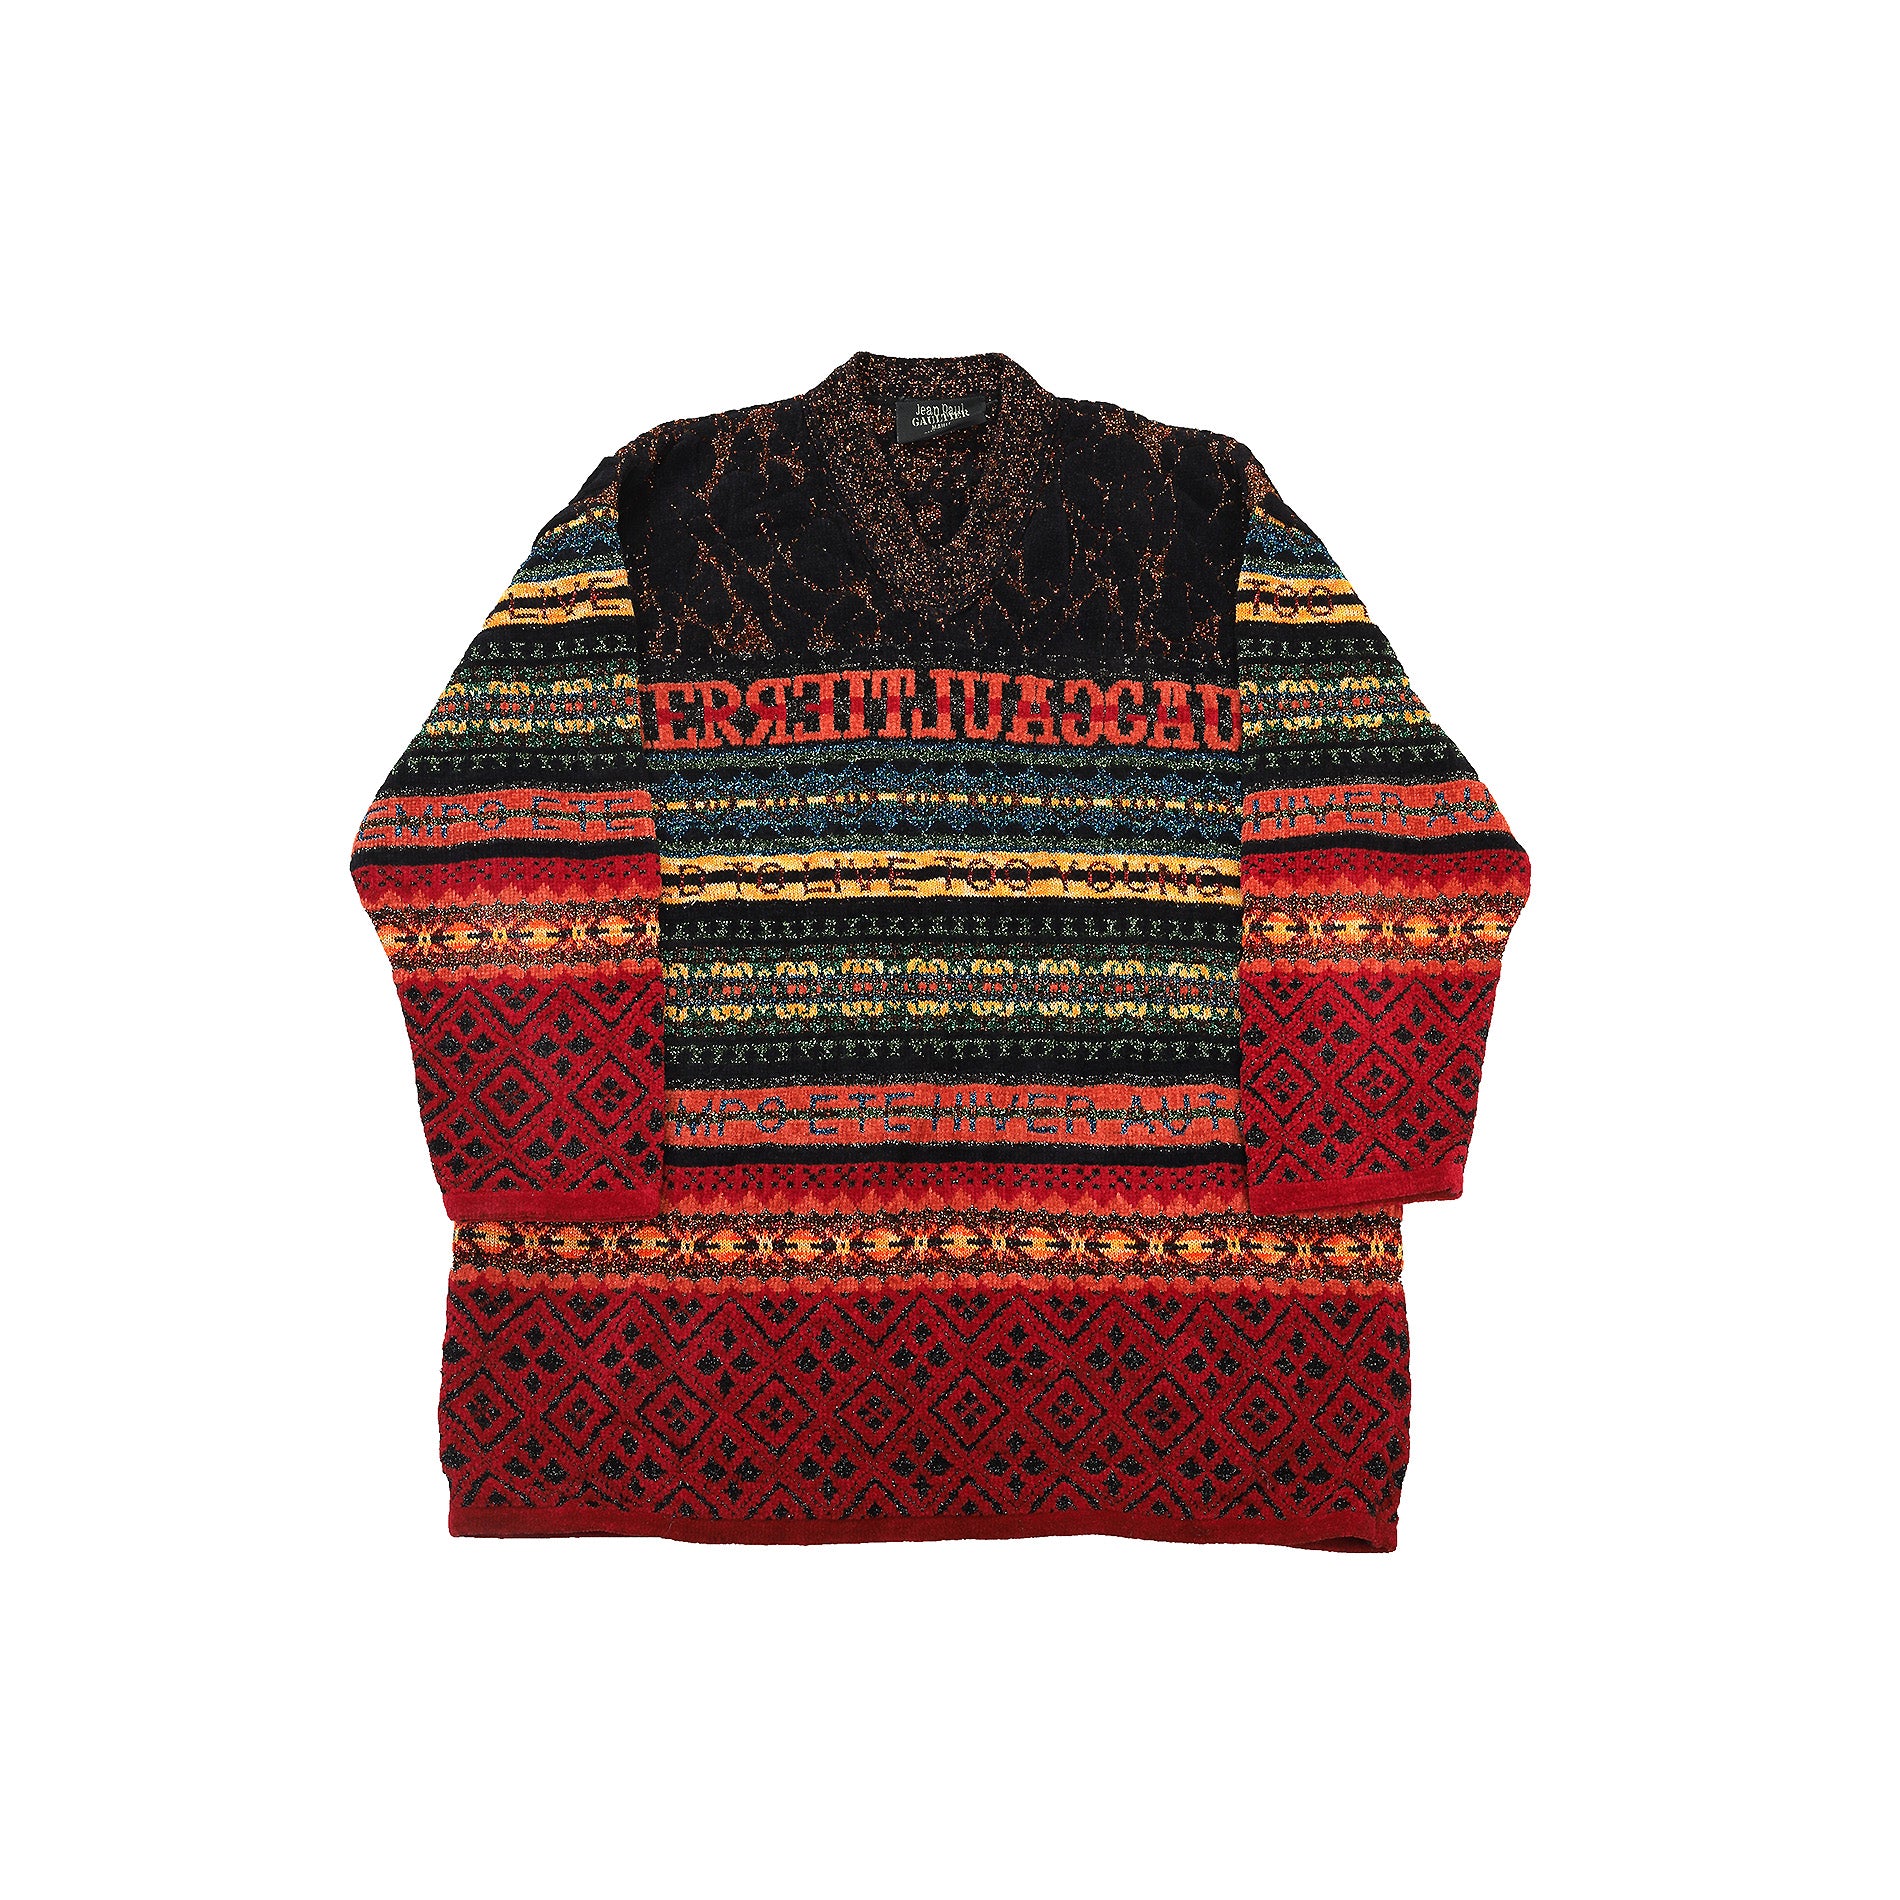 Jean Paul Gaultier FW95 "Too Wild To Live Too Young To Die" Knit